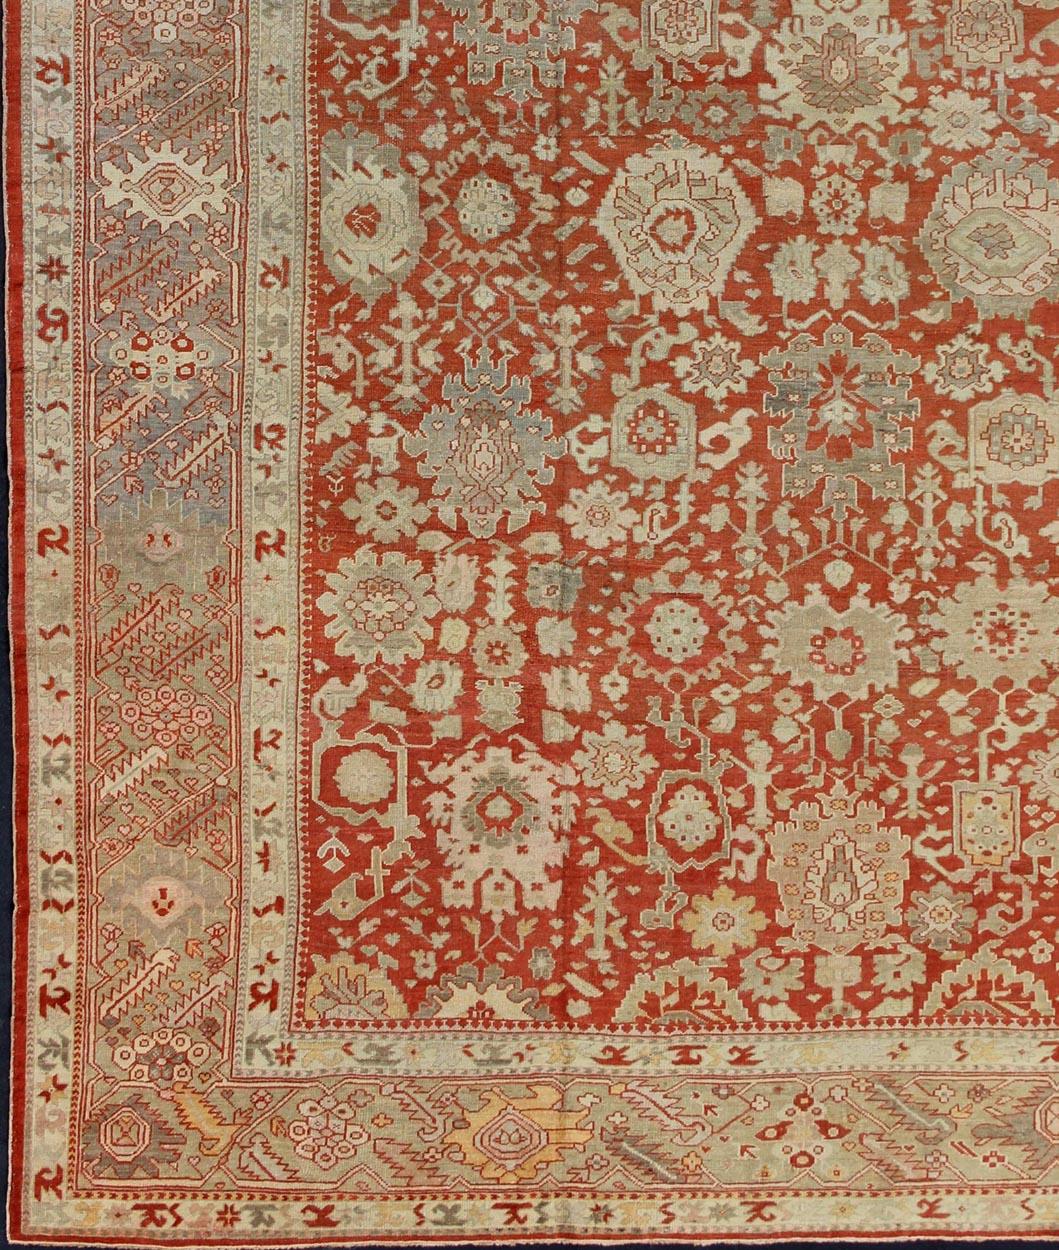 Large antique Oushak rug with all-over floral design in soft vermilion red, taupe, light green, gray and light orange rug/G-0102, Turkish antique Oushak.

Measures: 14'8 x 18'8

This magnificent Oushak carpet beautifully illustrates the stunning